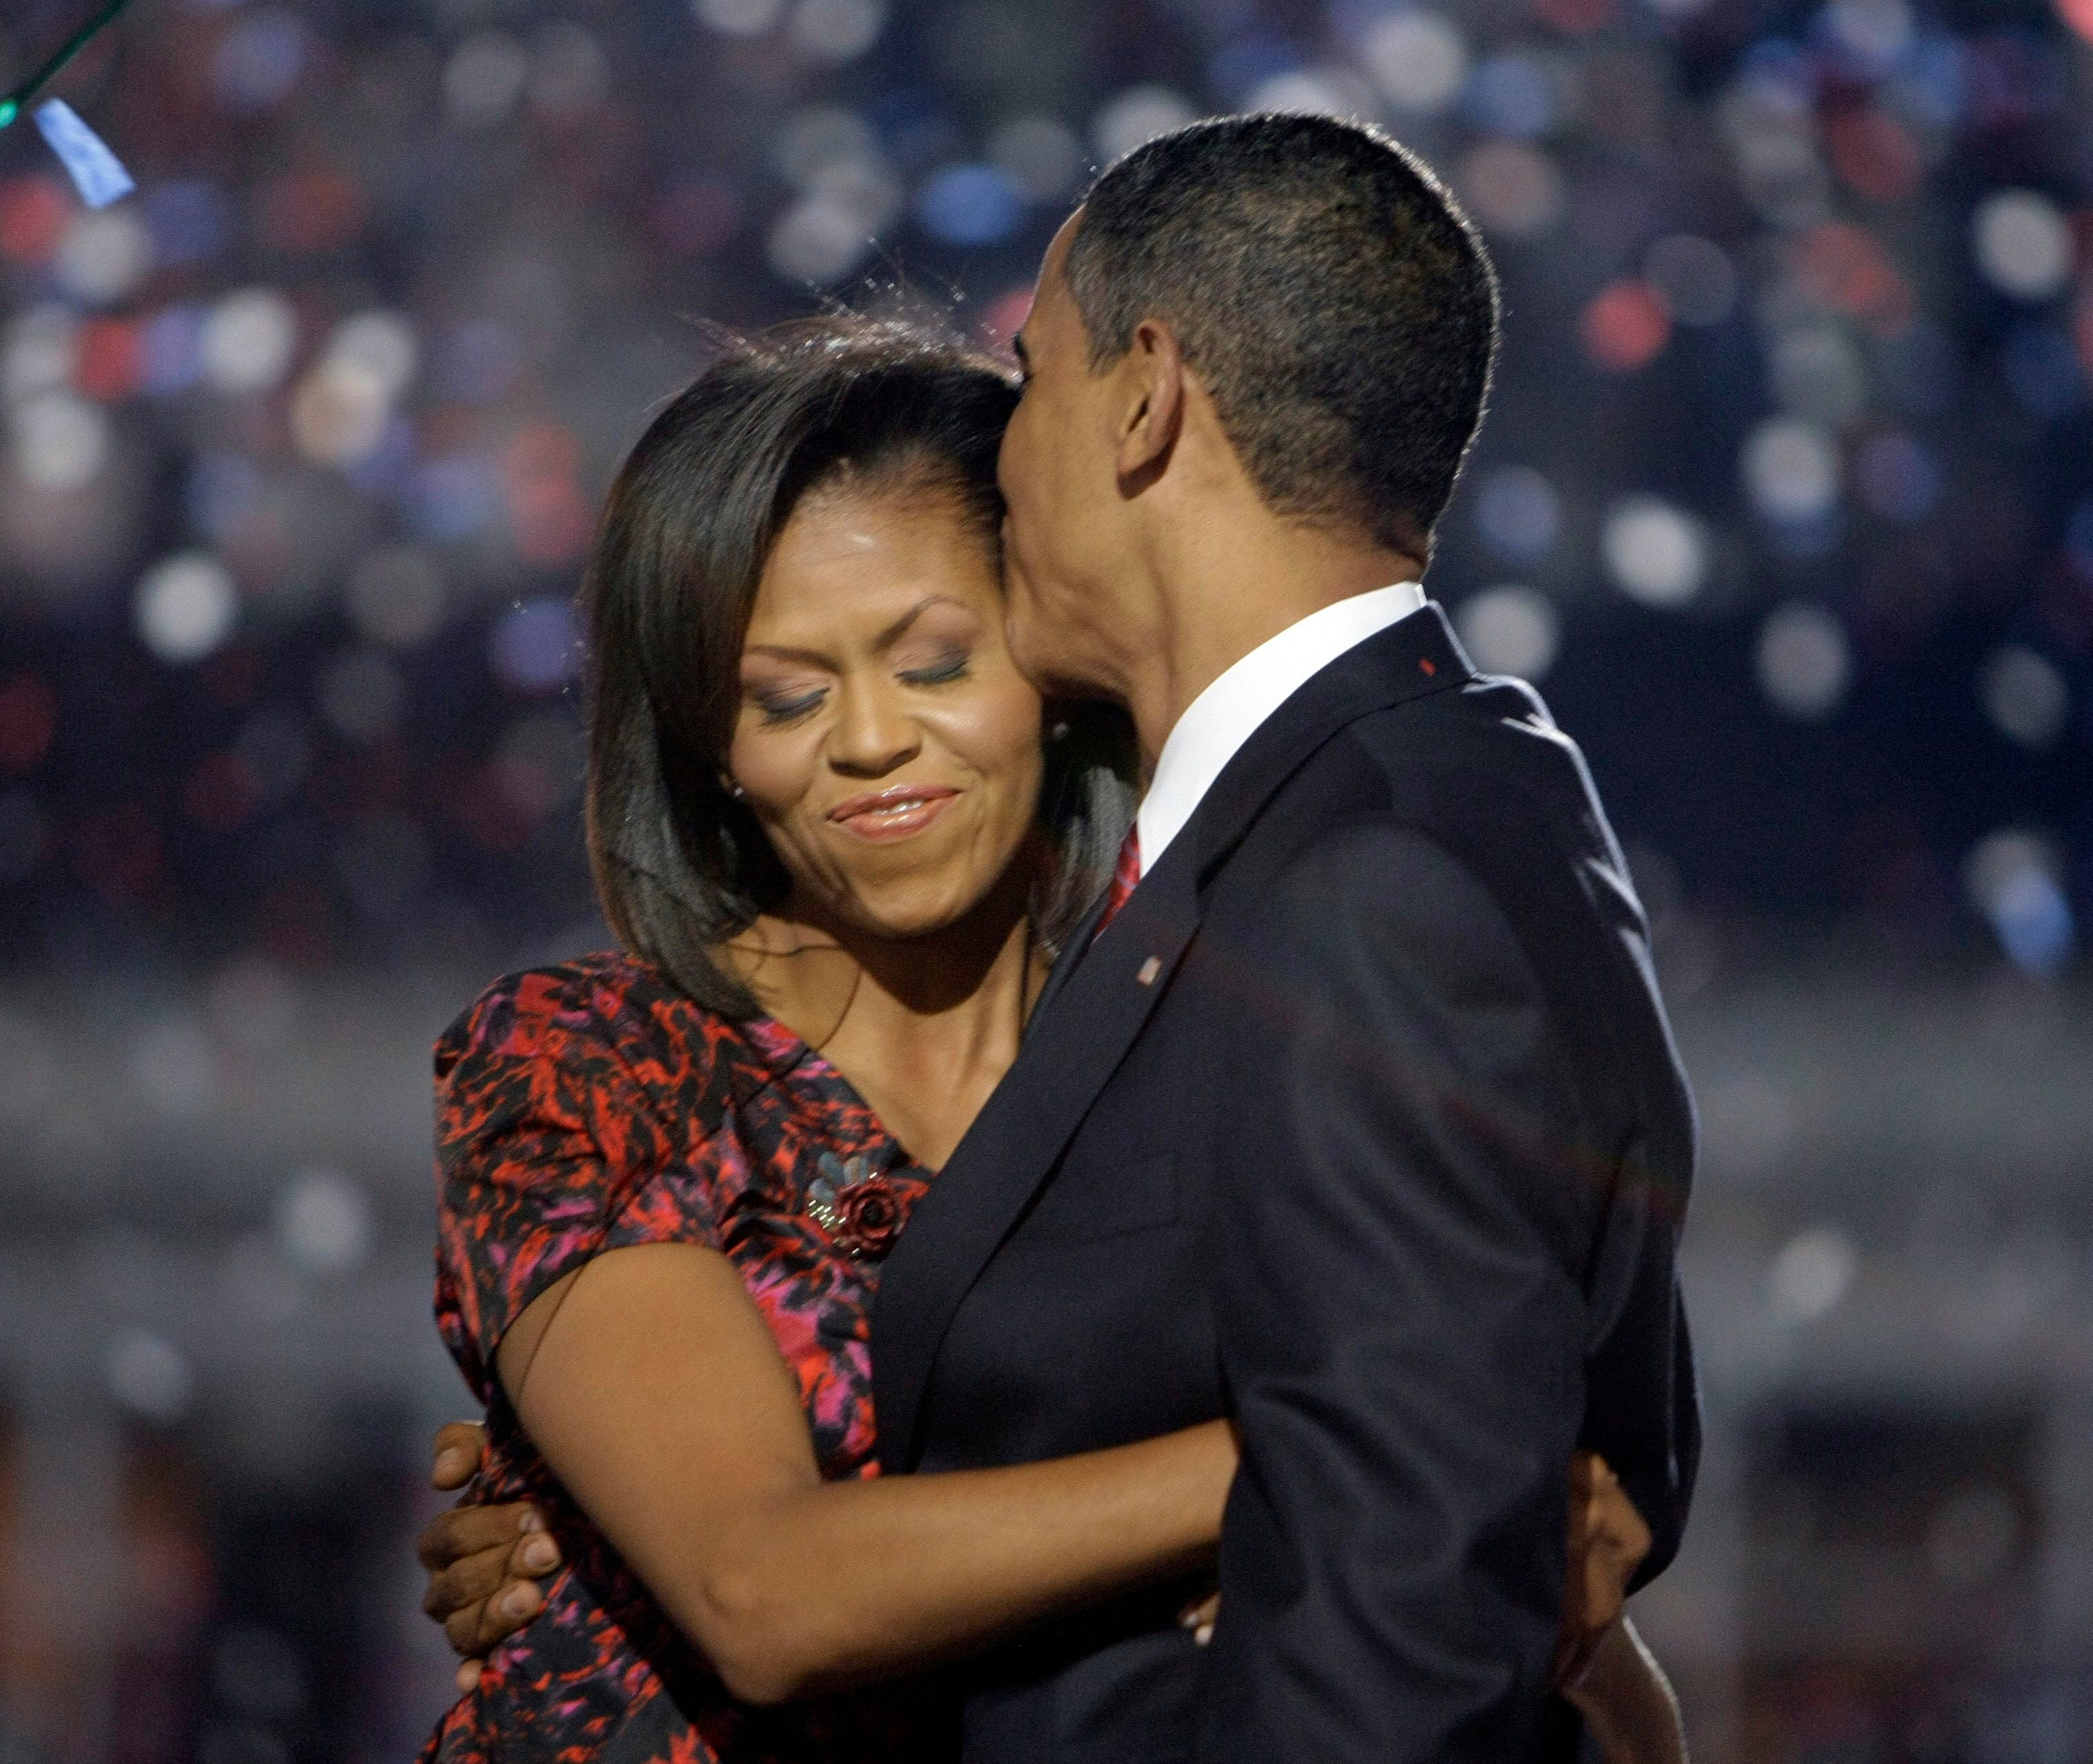 All Of The Times President Barack Obama Professed His Love For The First Lady